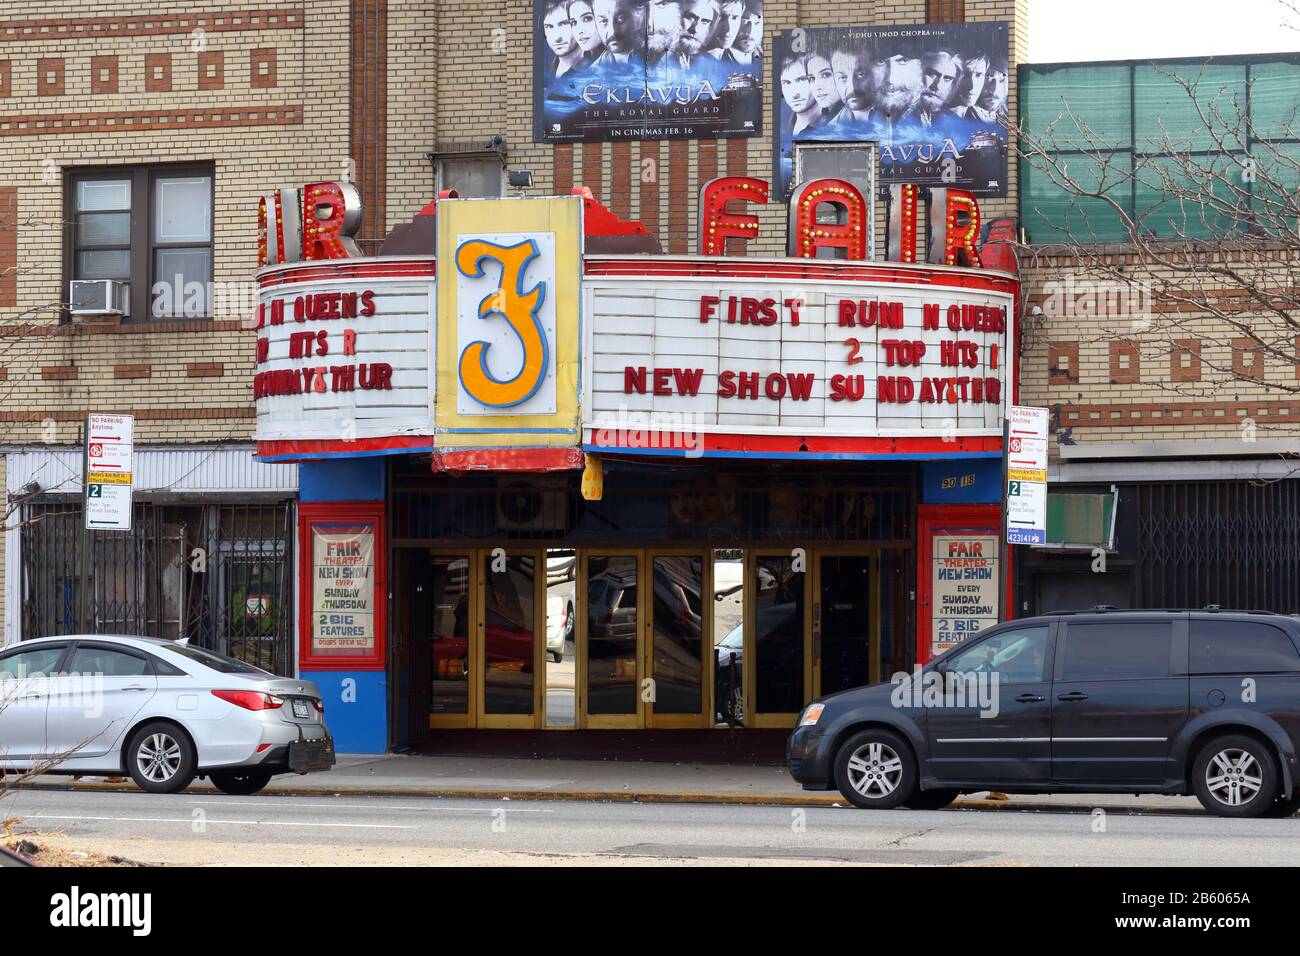 Fair Theatre, 90-18 Astoria Blvd, Queens, New York. NYC storefront photo of an adult movie theater in Jackson Heights, East Elmhurst. Stock Photo